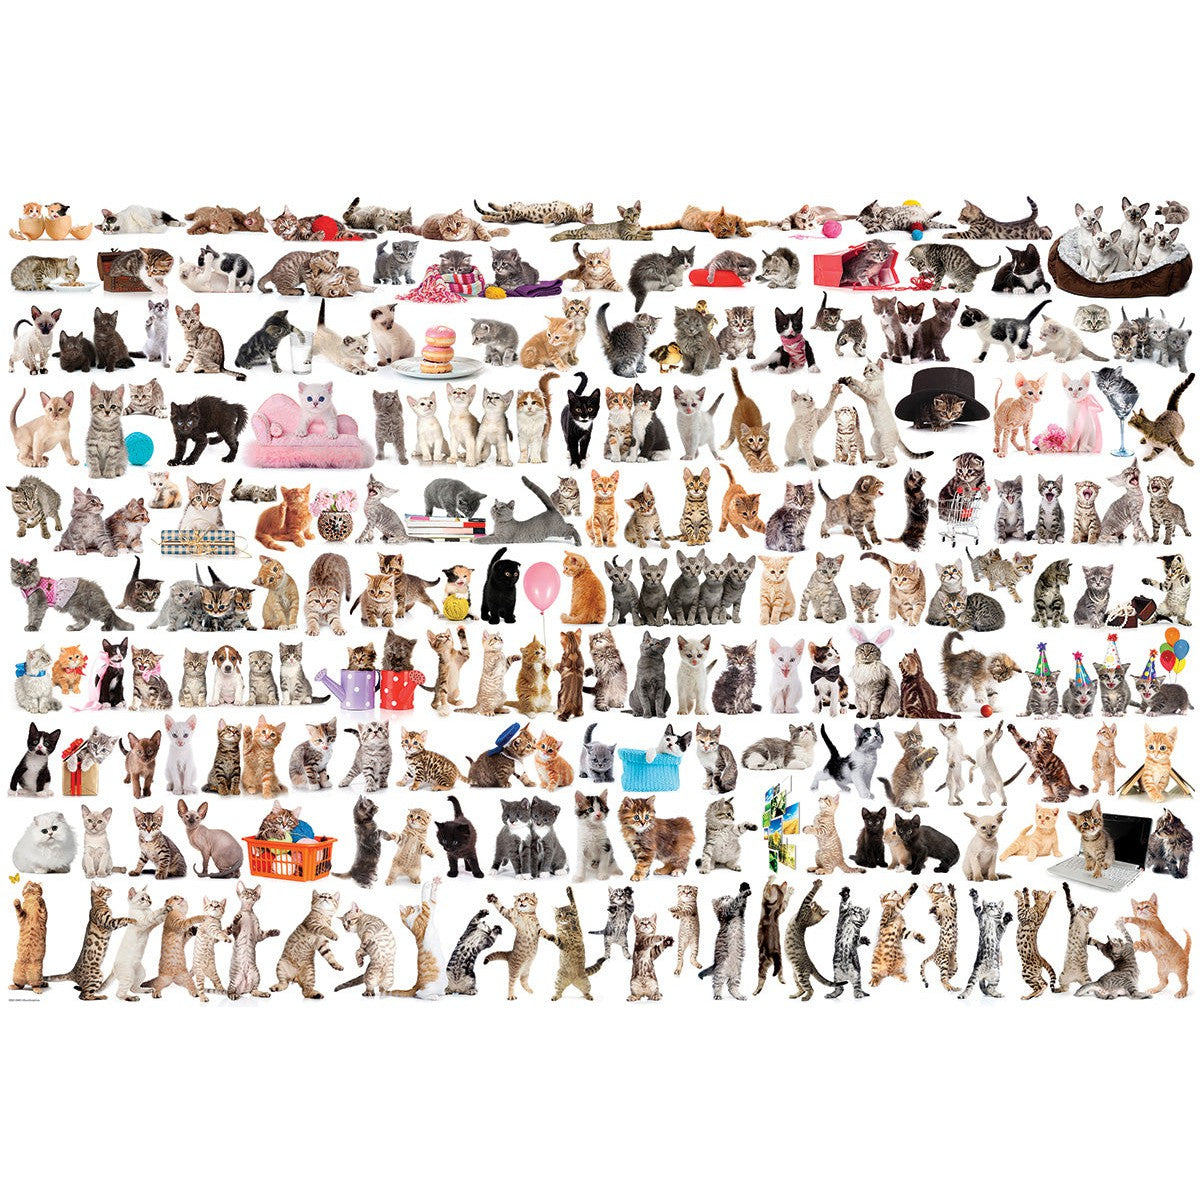 The World of Cats 2000 Piece Jigsaw Puzzle Eurographics